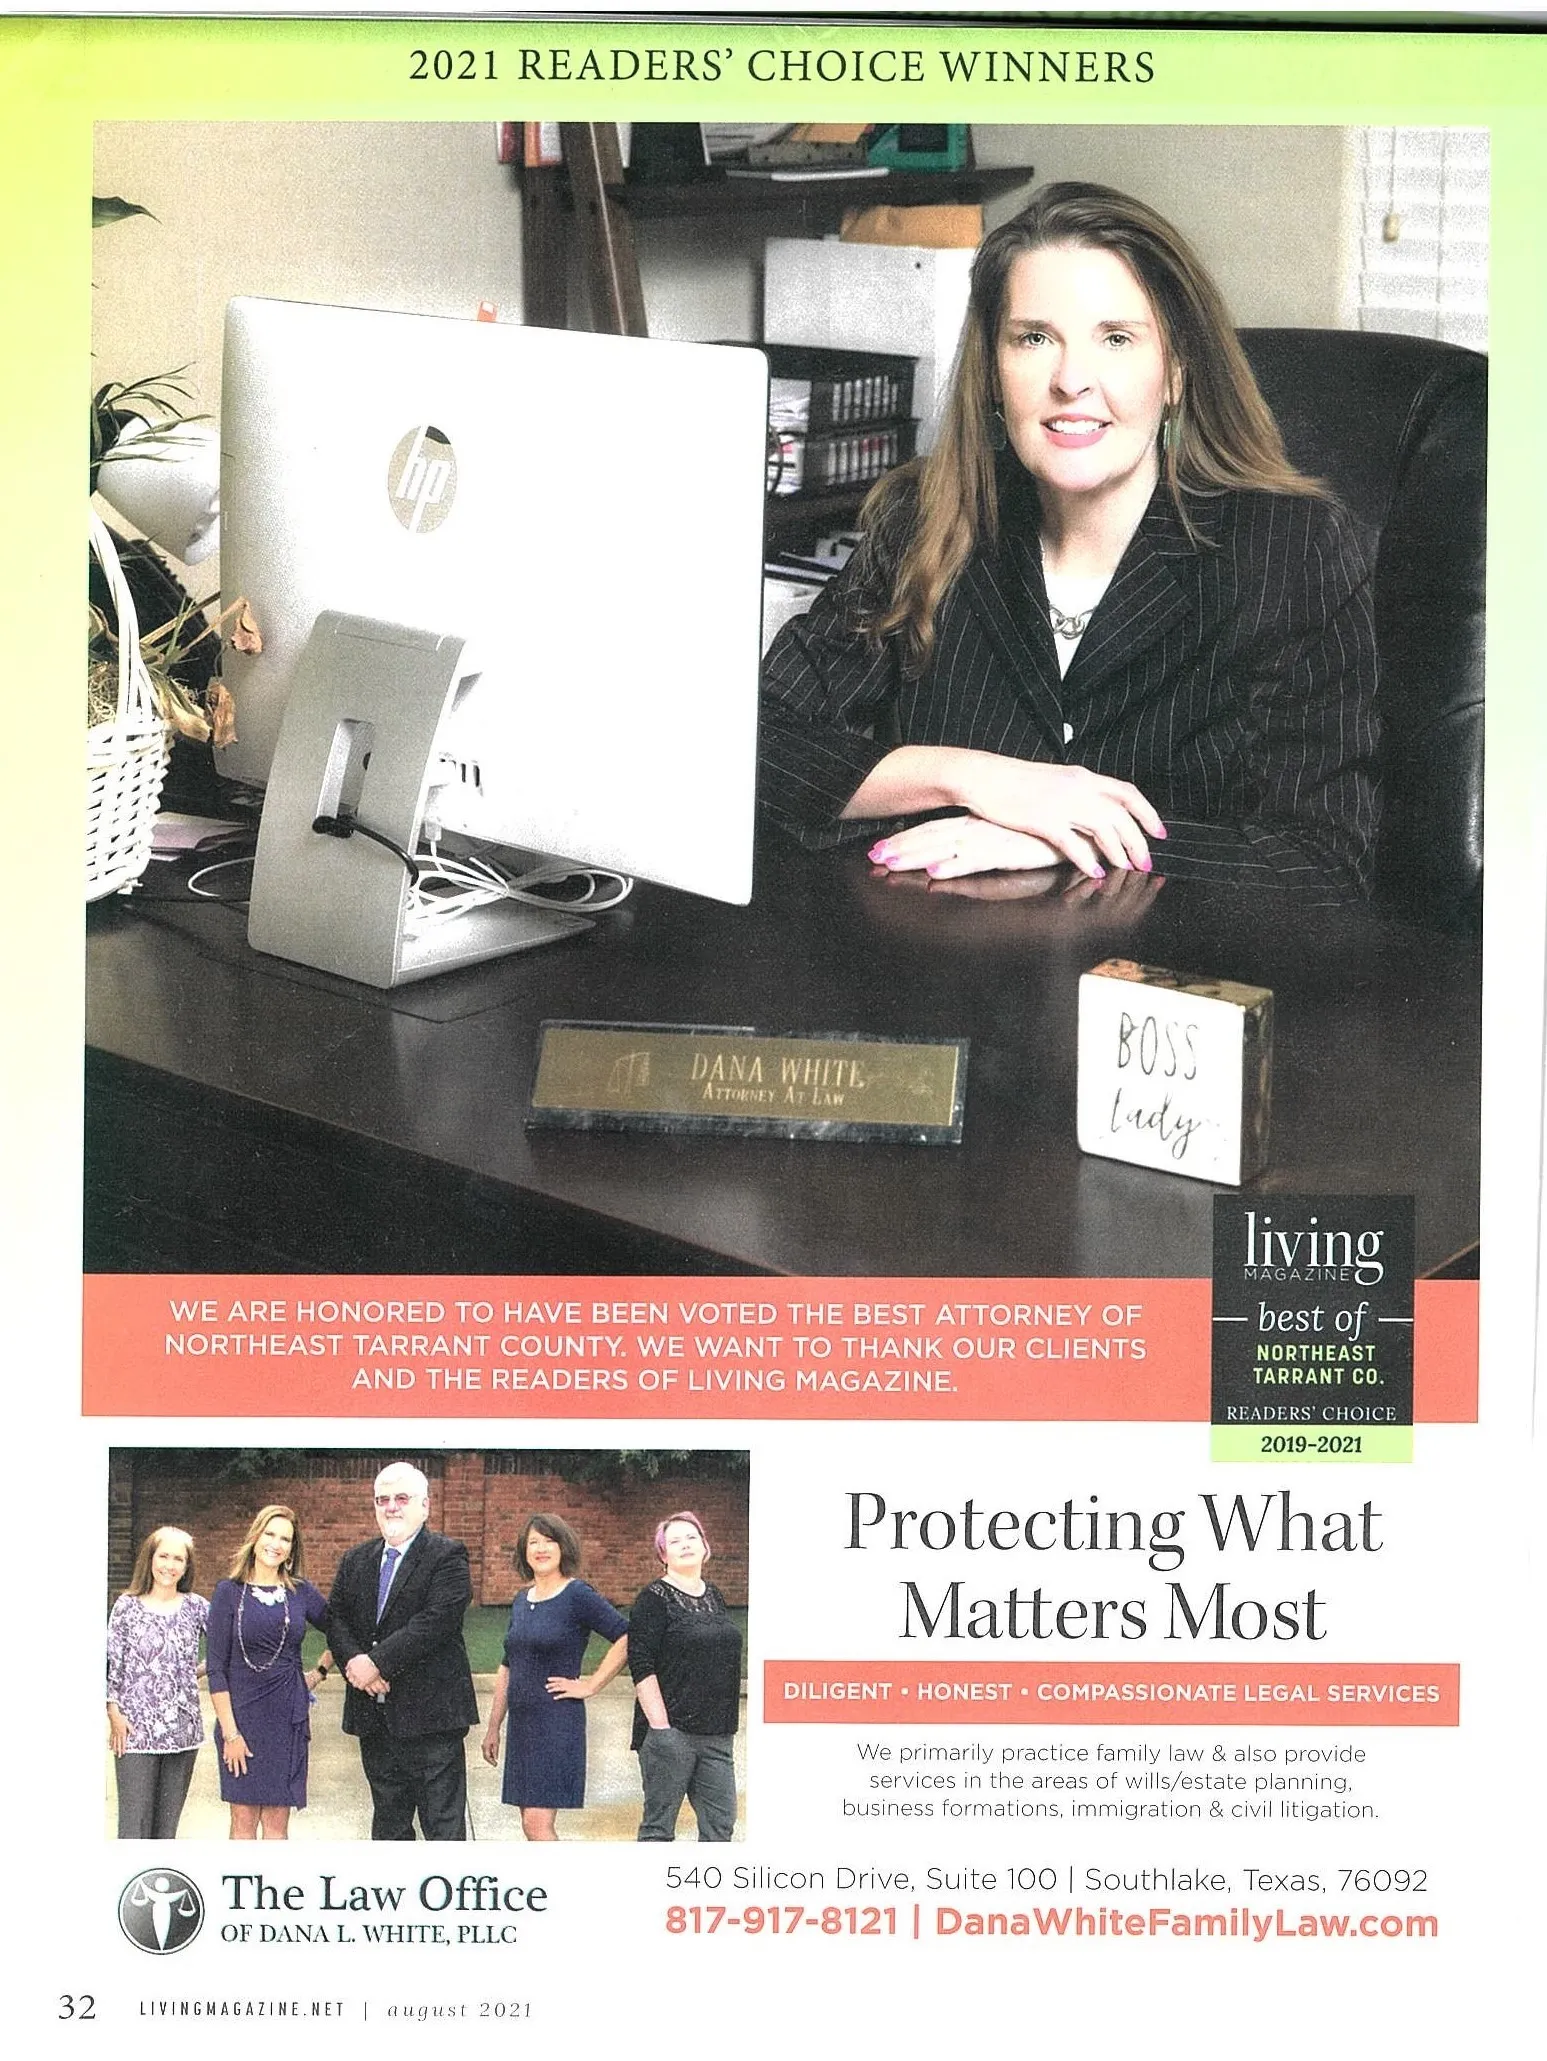 Law Office of Dana L. White - “Best Of Readers’ Choice Awards!”